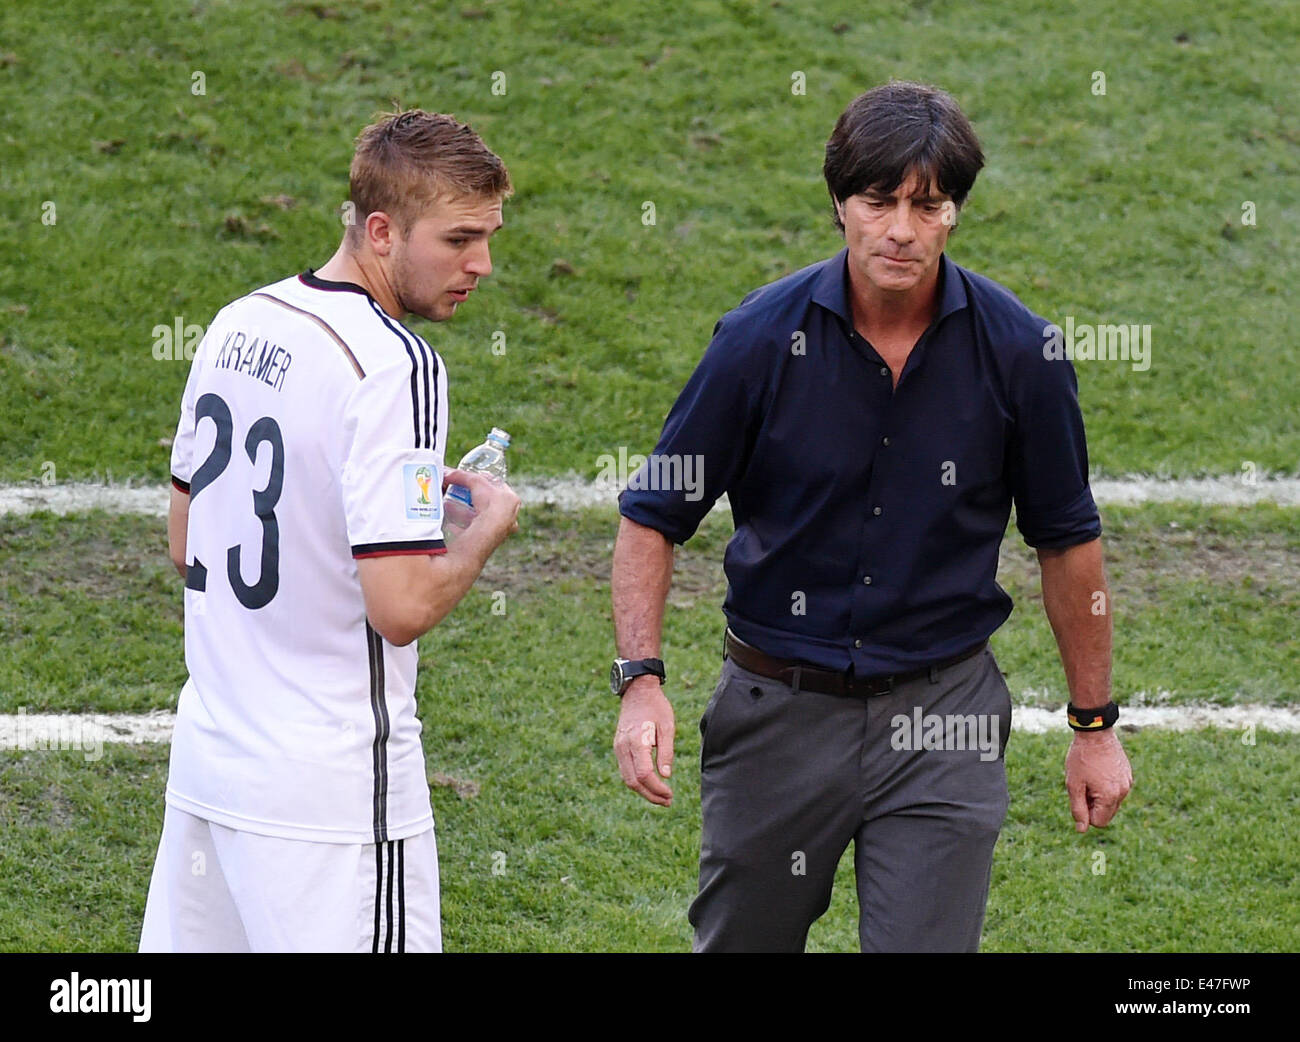 Rio de Janeiro, Brazil. 04th July, 2014. Head coach Joachim Loew (R) of Germany Christoph Kramer (L) of Germany during the FIFA World Cup 2014 quarter final soccer match between France and Germany at Estadio do Maracana in Rio de Janeiro, Brazil, 04 July 2014. Photo: Marcus Brandt/dpa/Alamy Live News Stock Photo